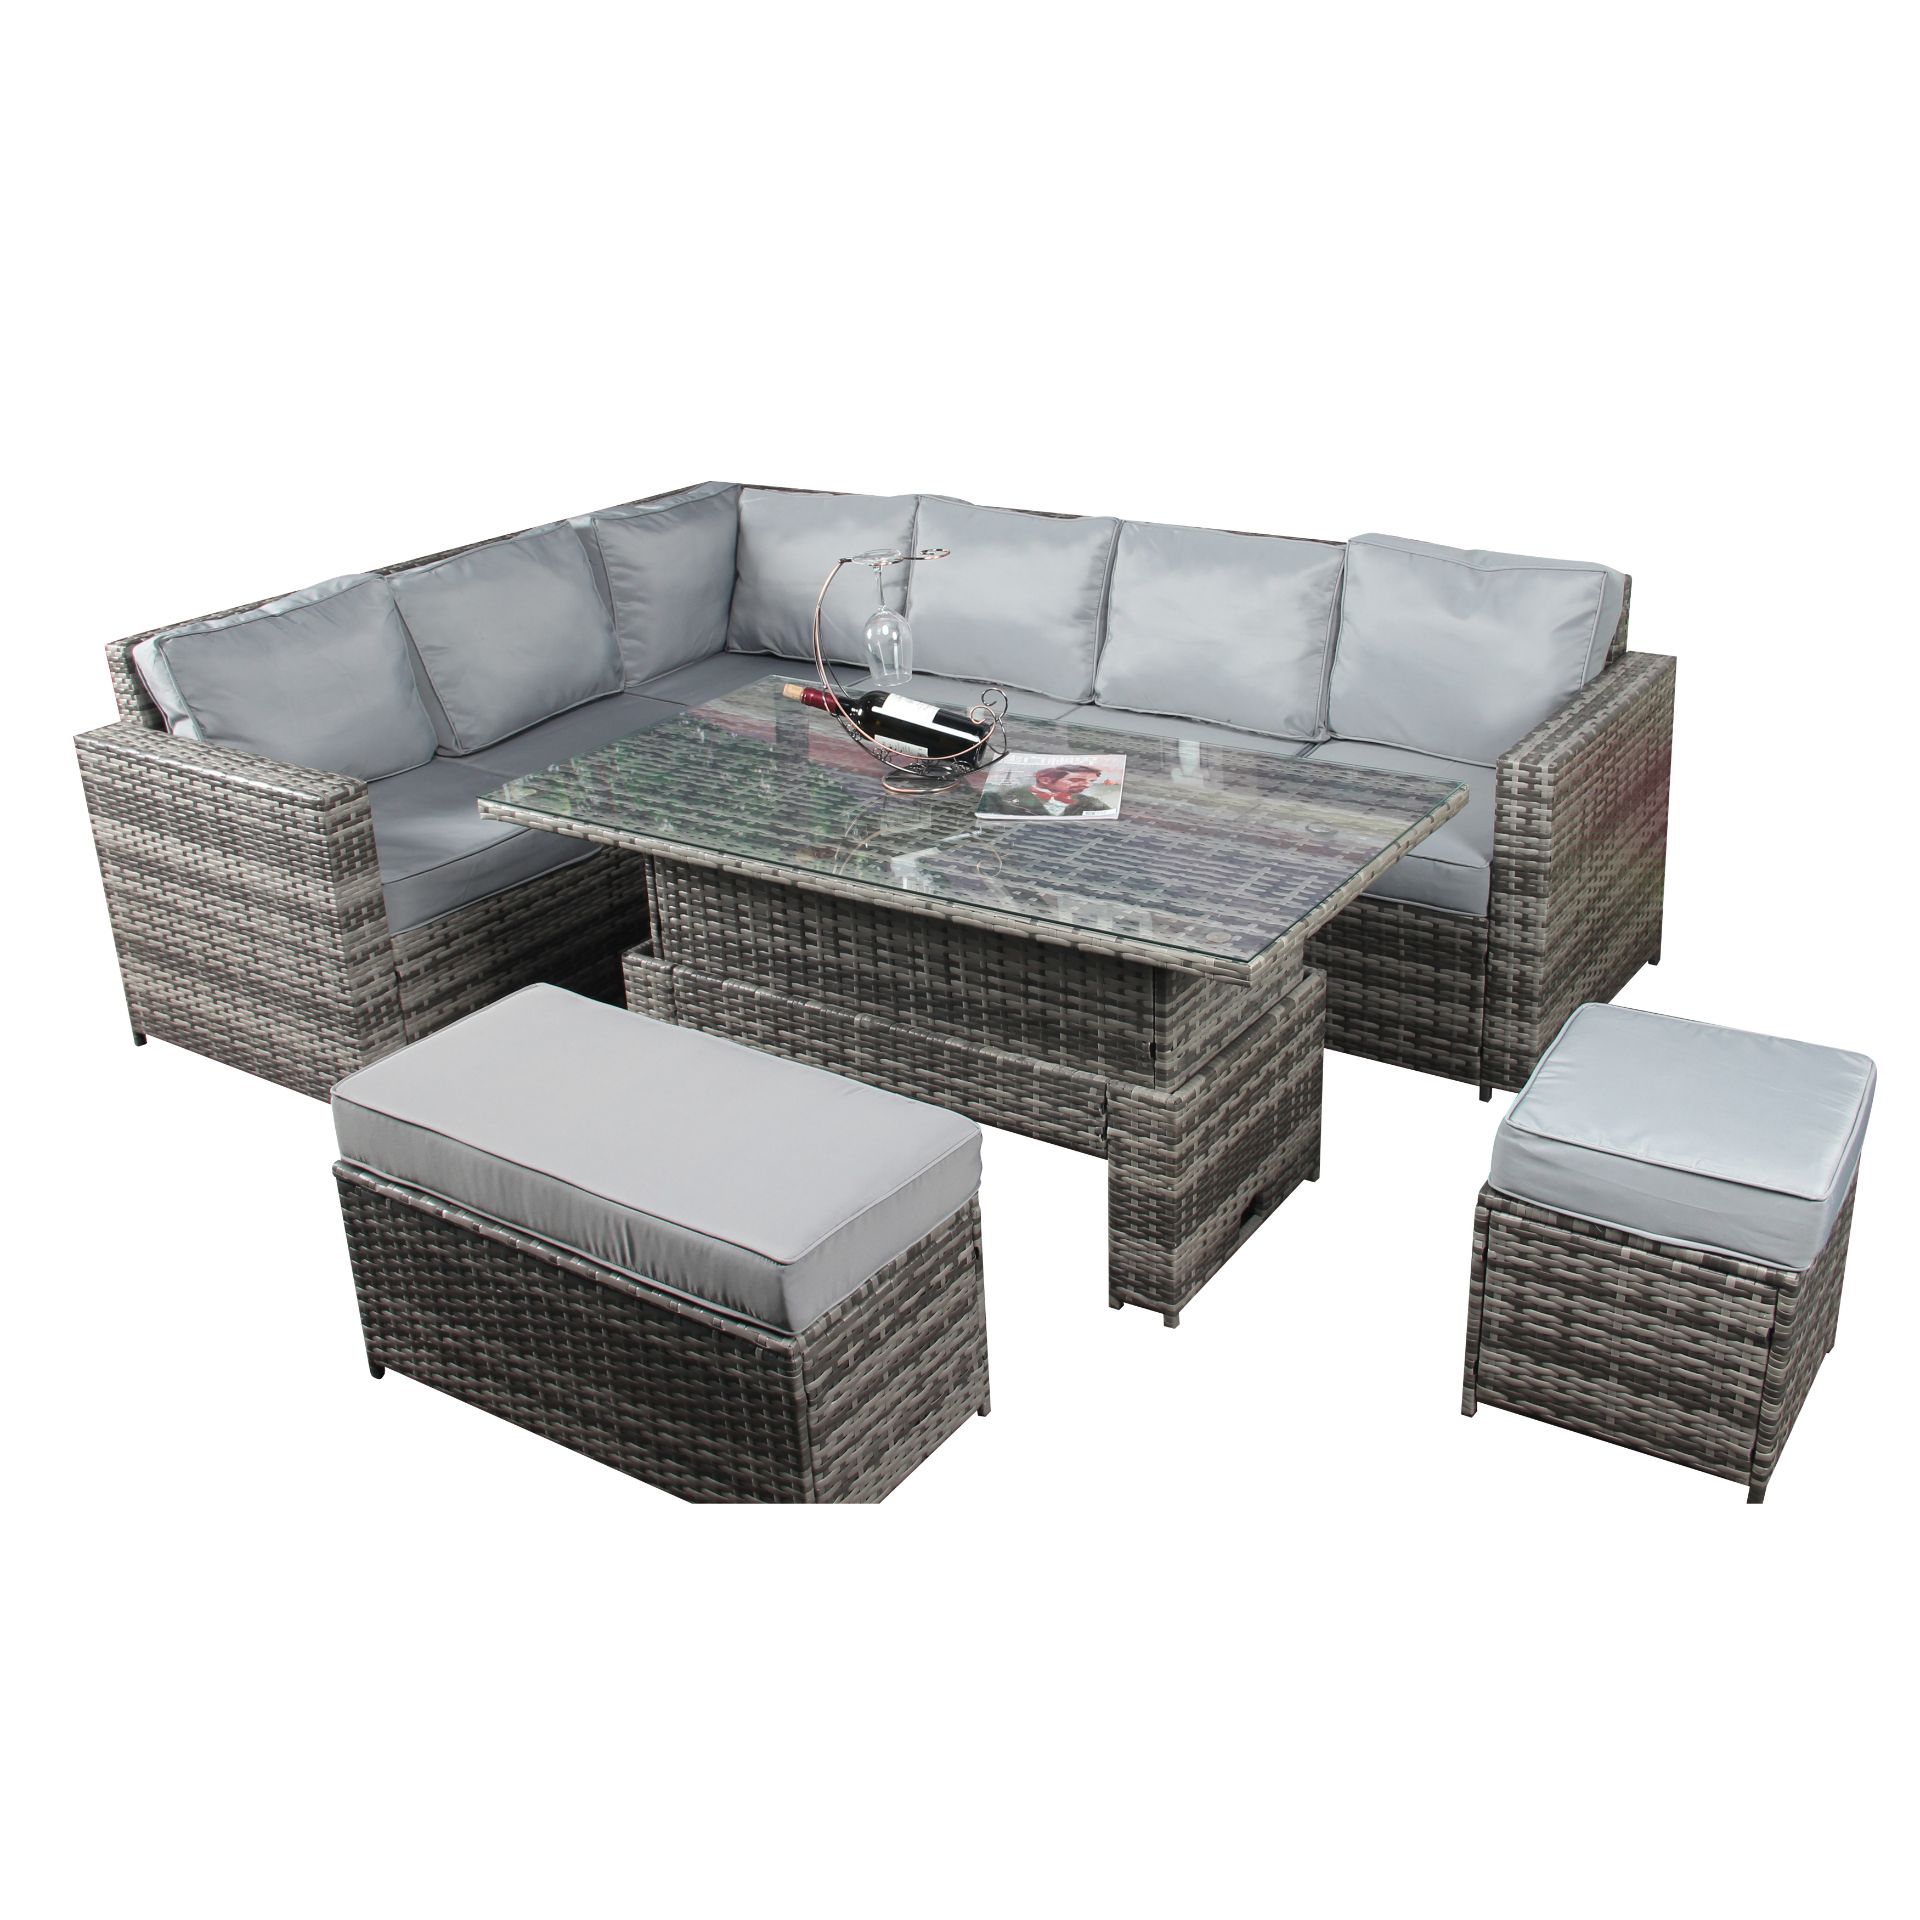 Brand new Rattan set 8 seater corner set with rise and lowering table *PLUS VAT*